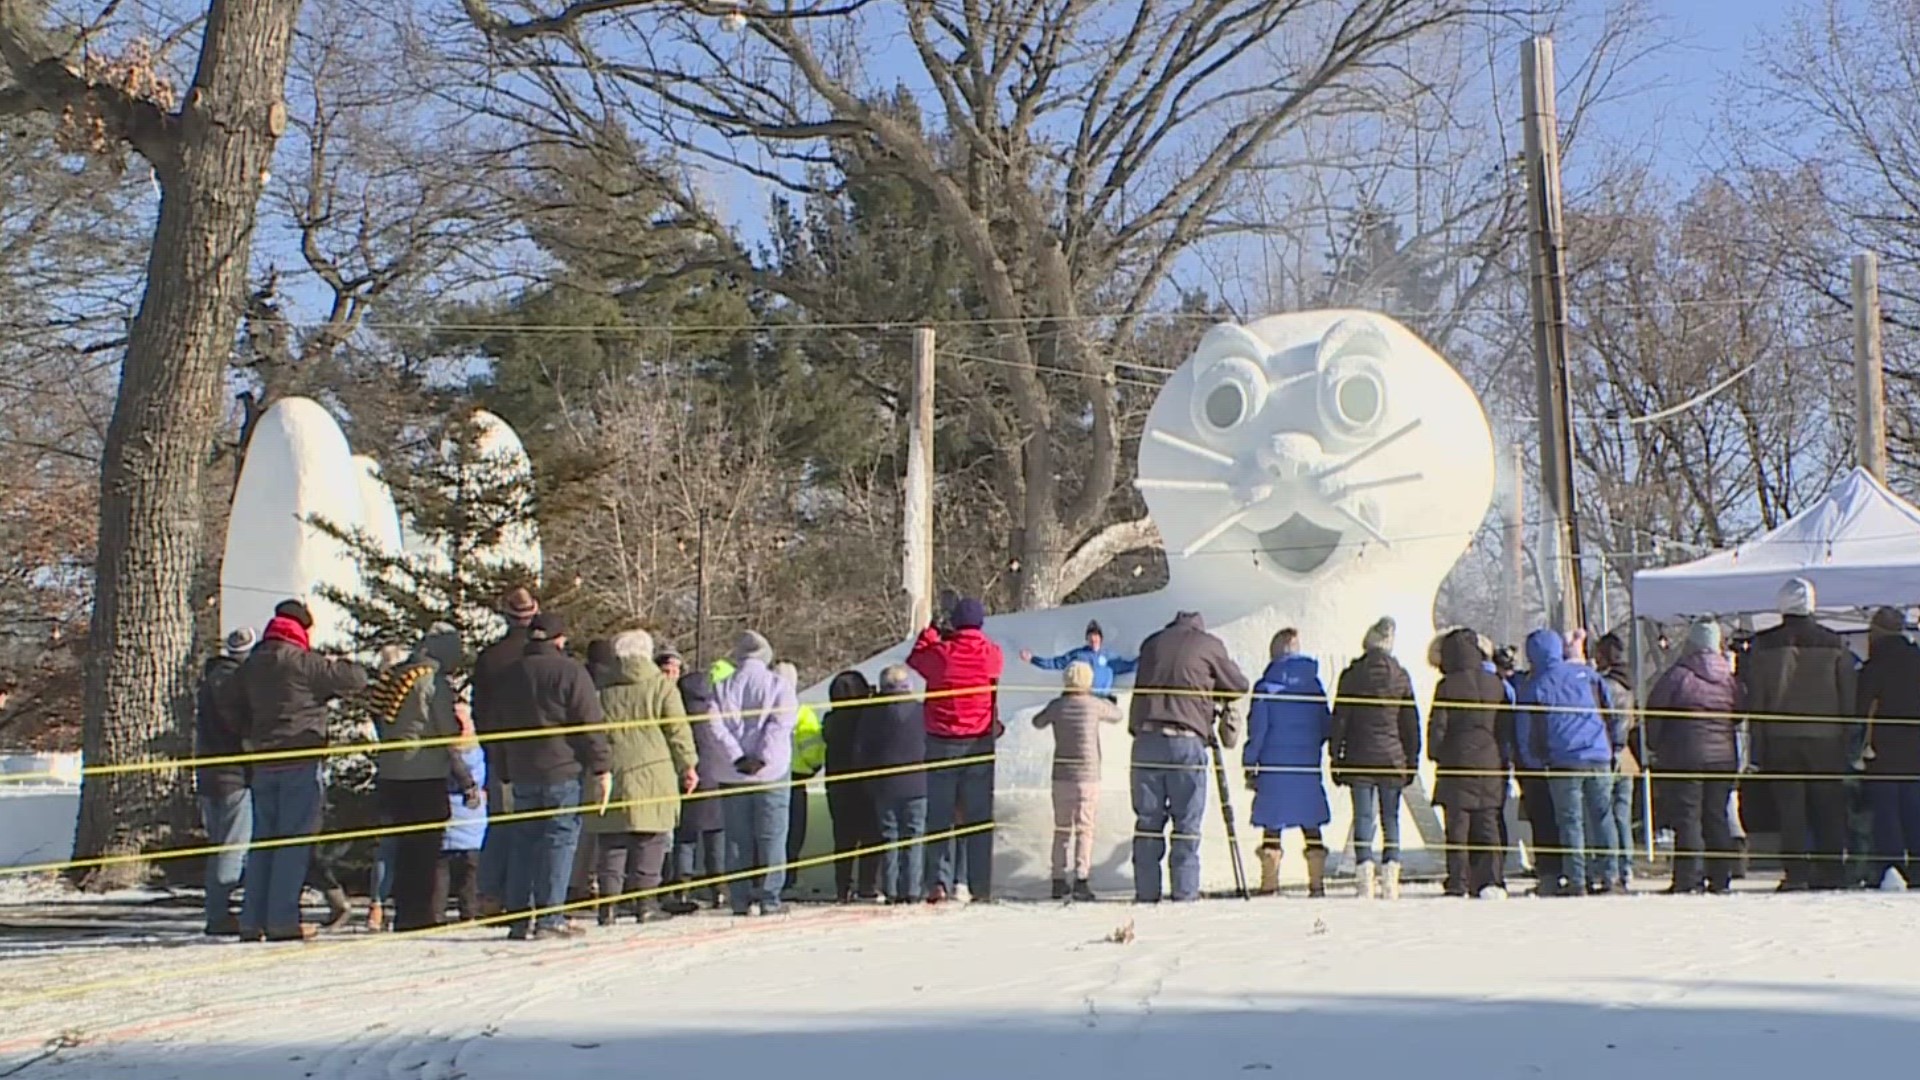 They said the tribute to Sparky the Seal is their largest sculpture ever.